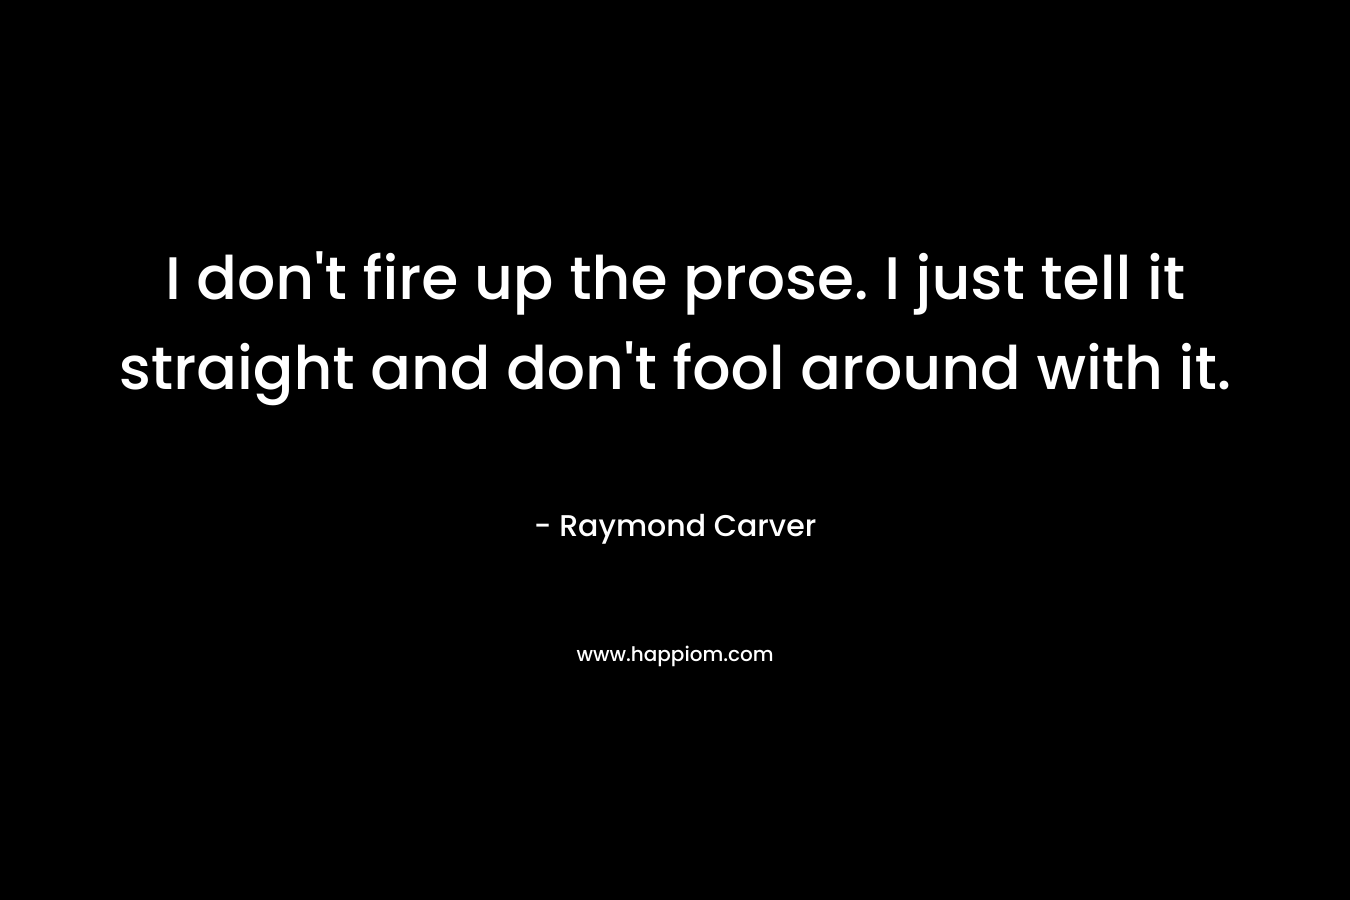 I don’t fire up the prose. I just tell it straight and don’t fool around with it. – Raymond Carver